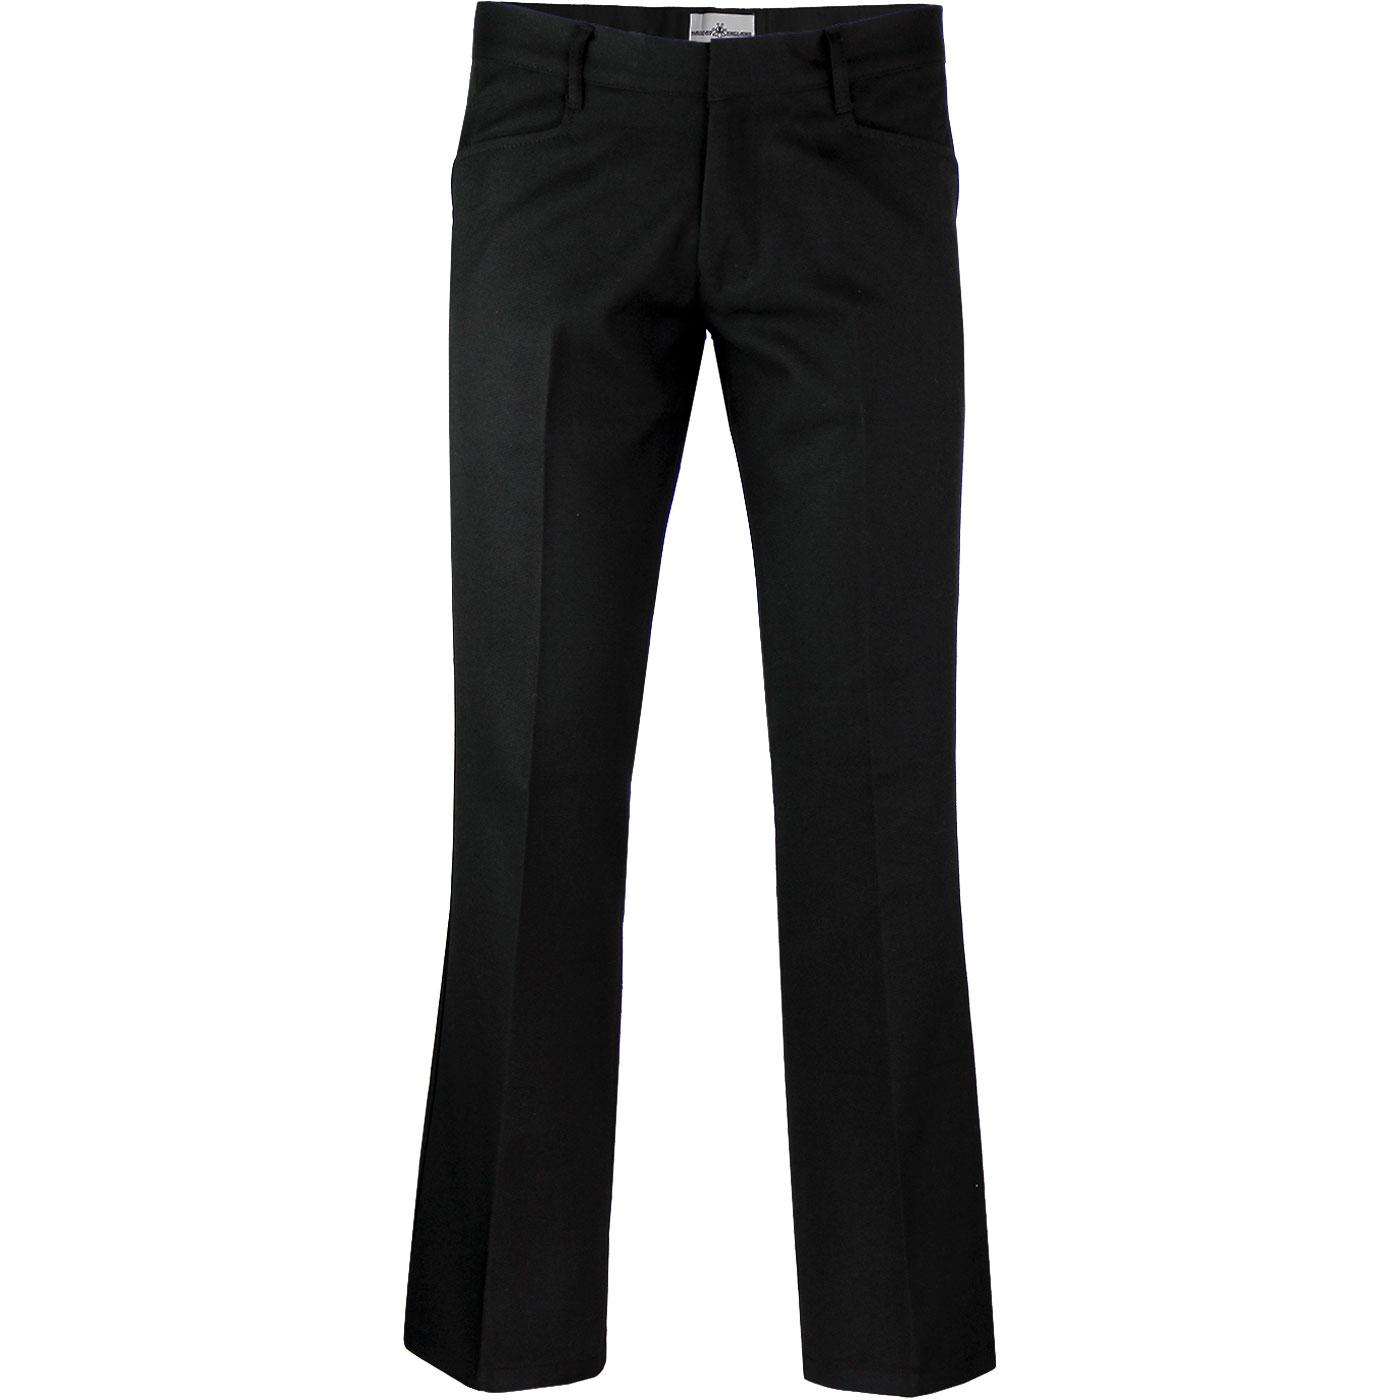 Buy Bootcut Mens Trouser Online In India - Etsy India-totobed.com.vn